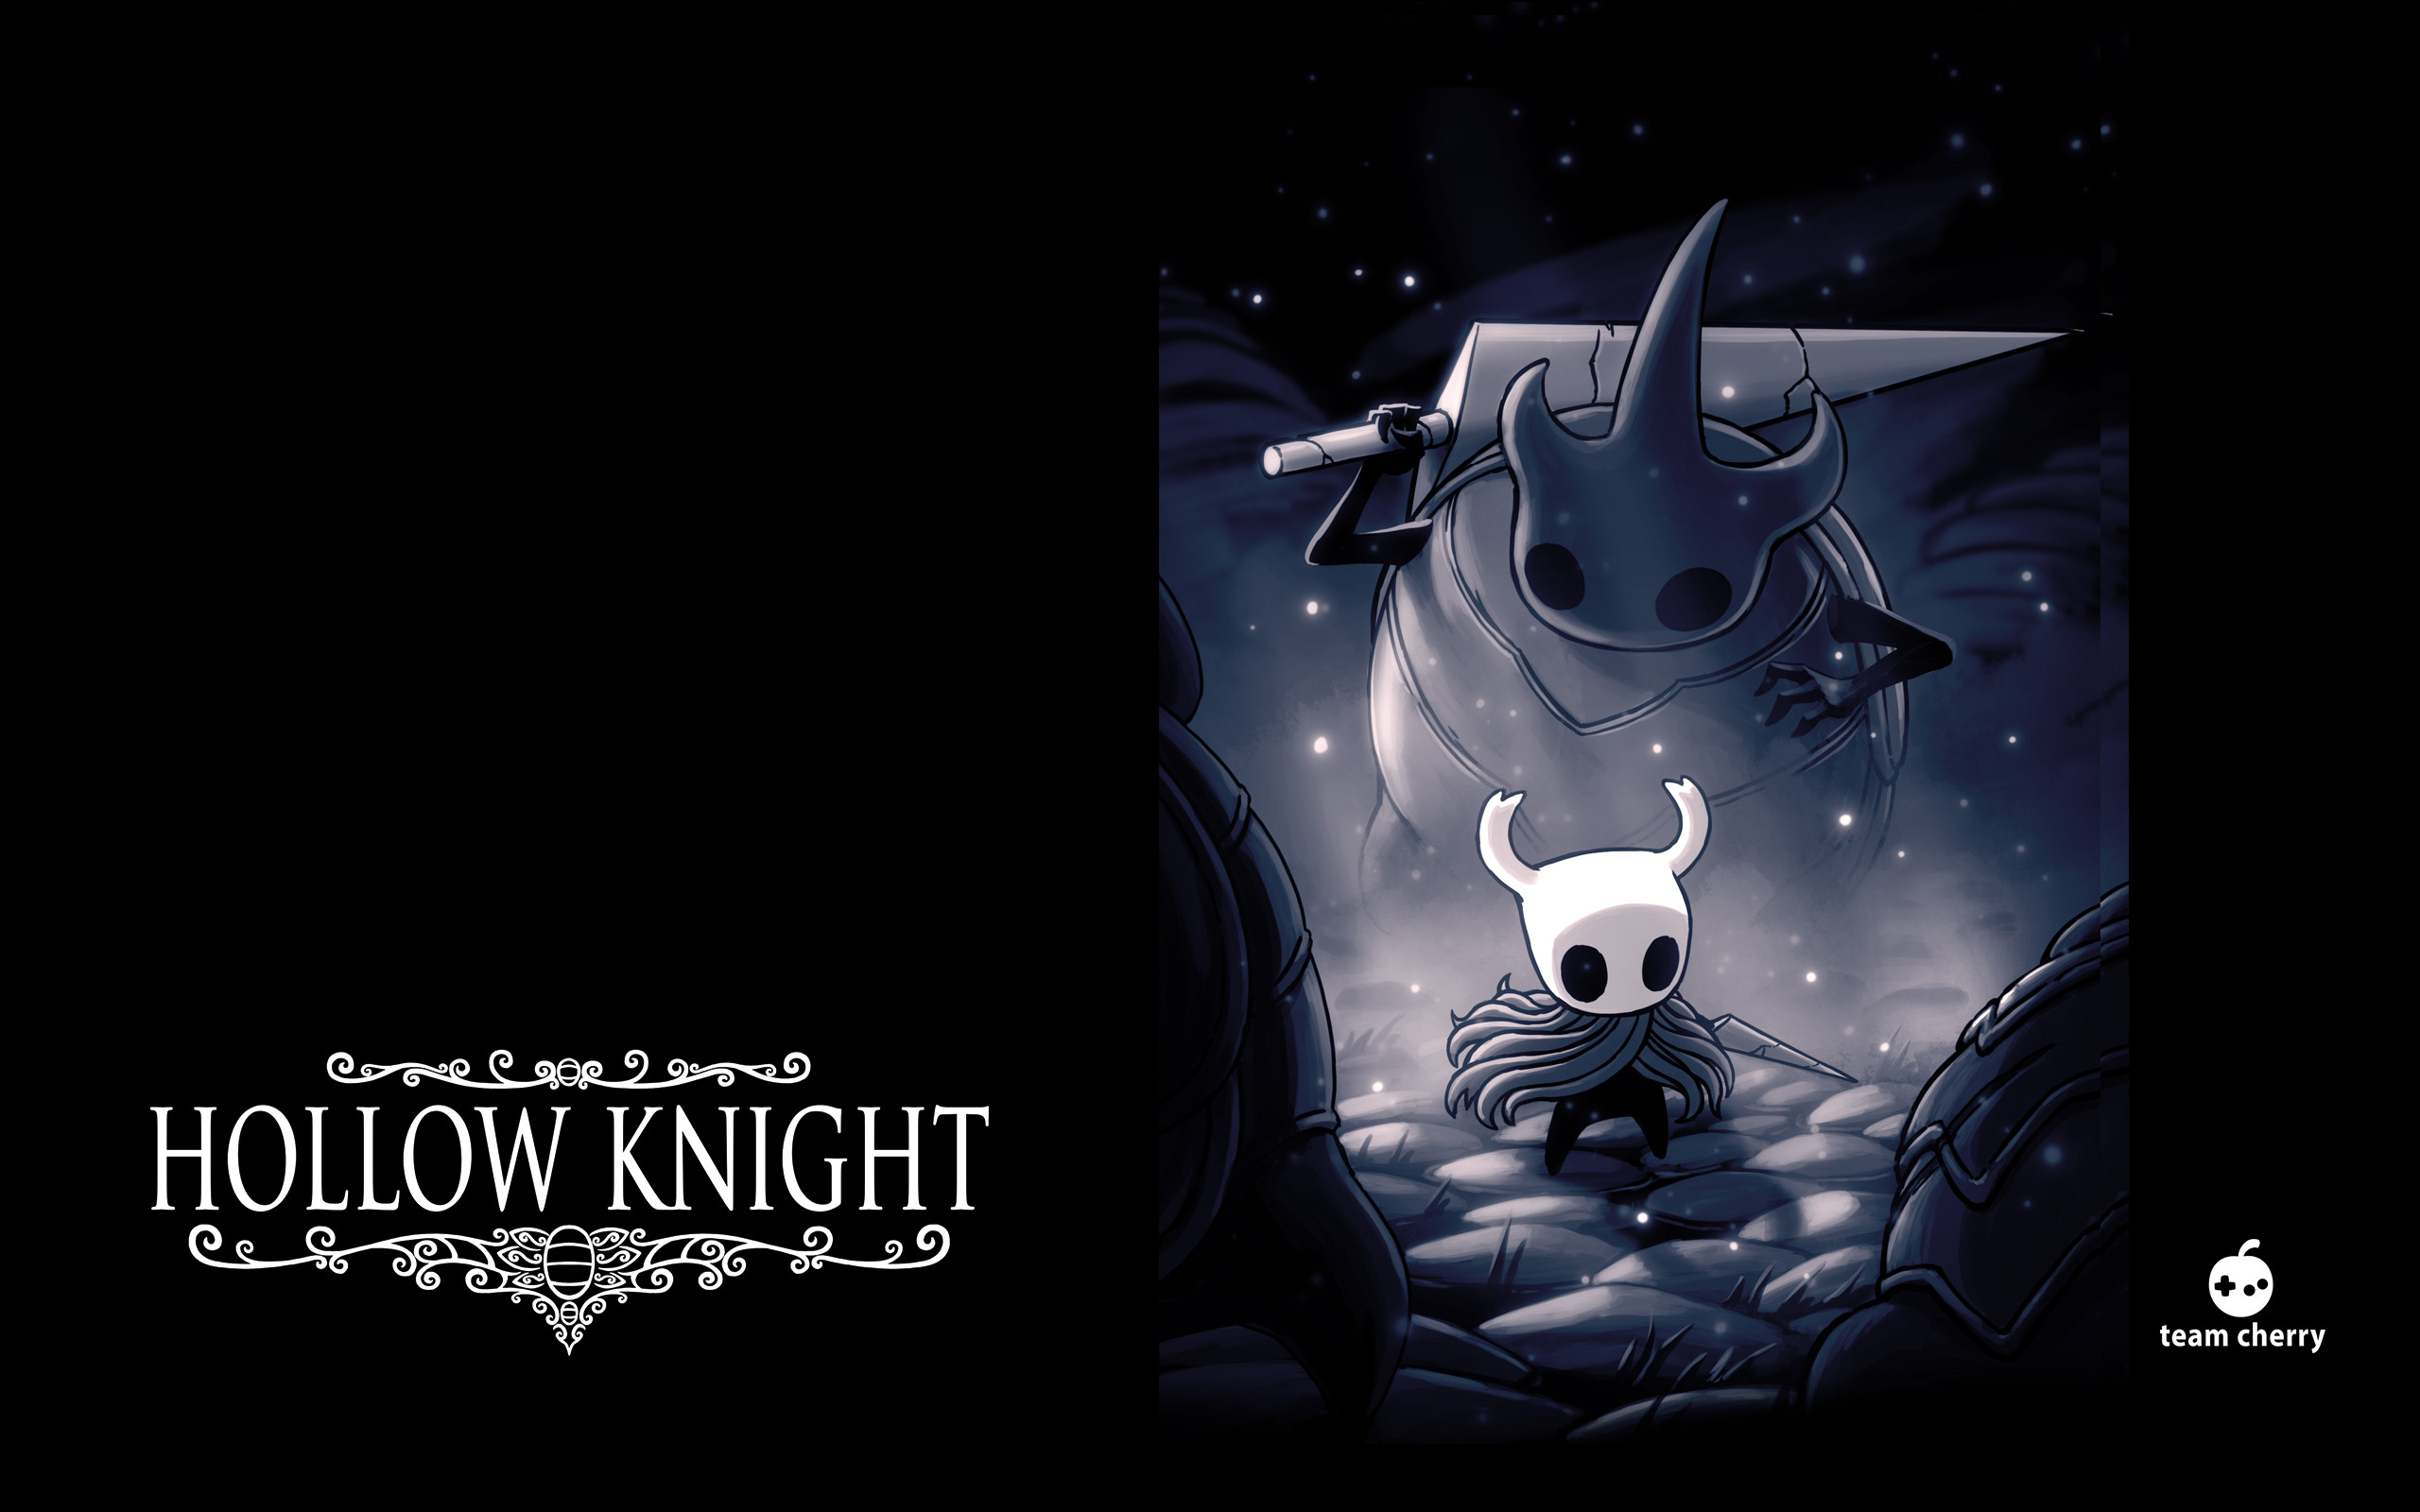 Hollow Knight 7 Days to Die and Hitman Available on Humble